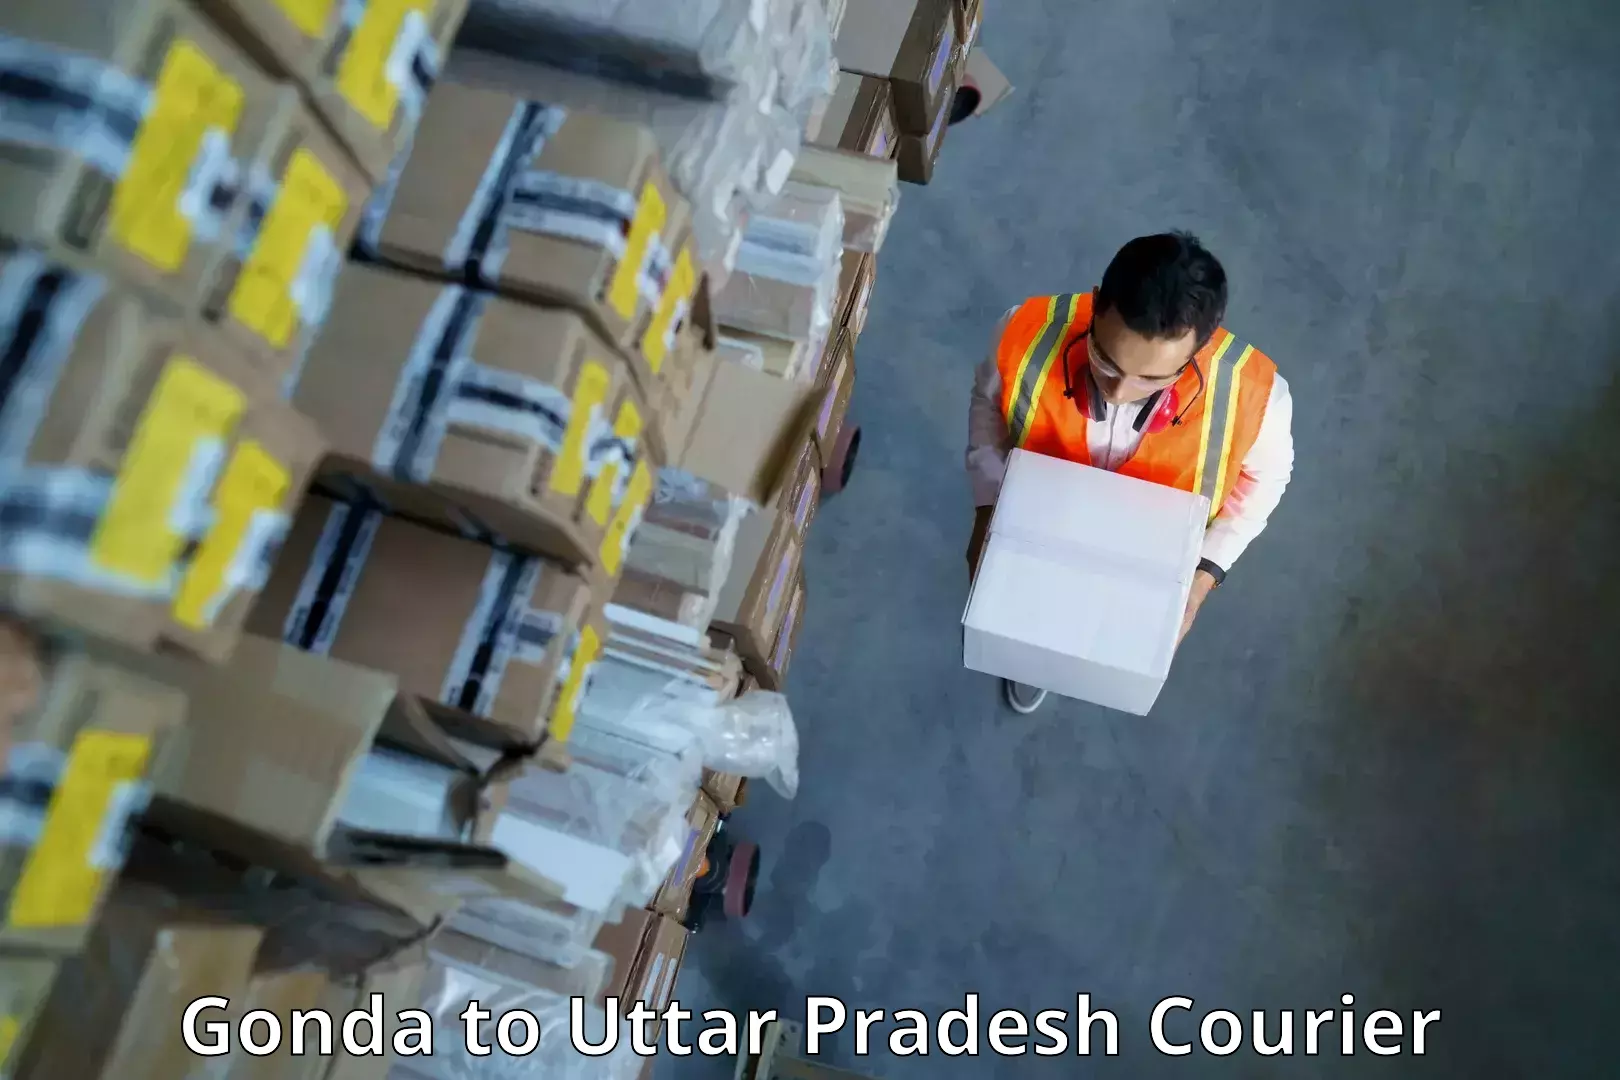 On-call courier service in Gonda to Shahjahanpur